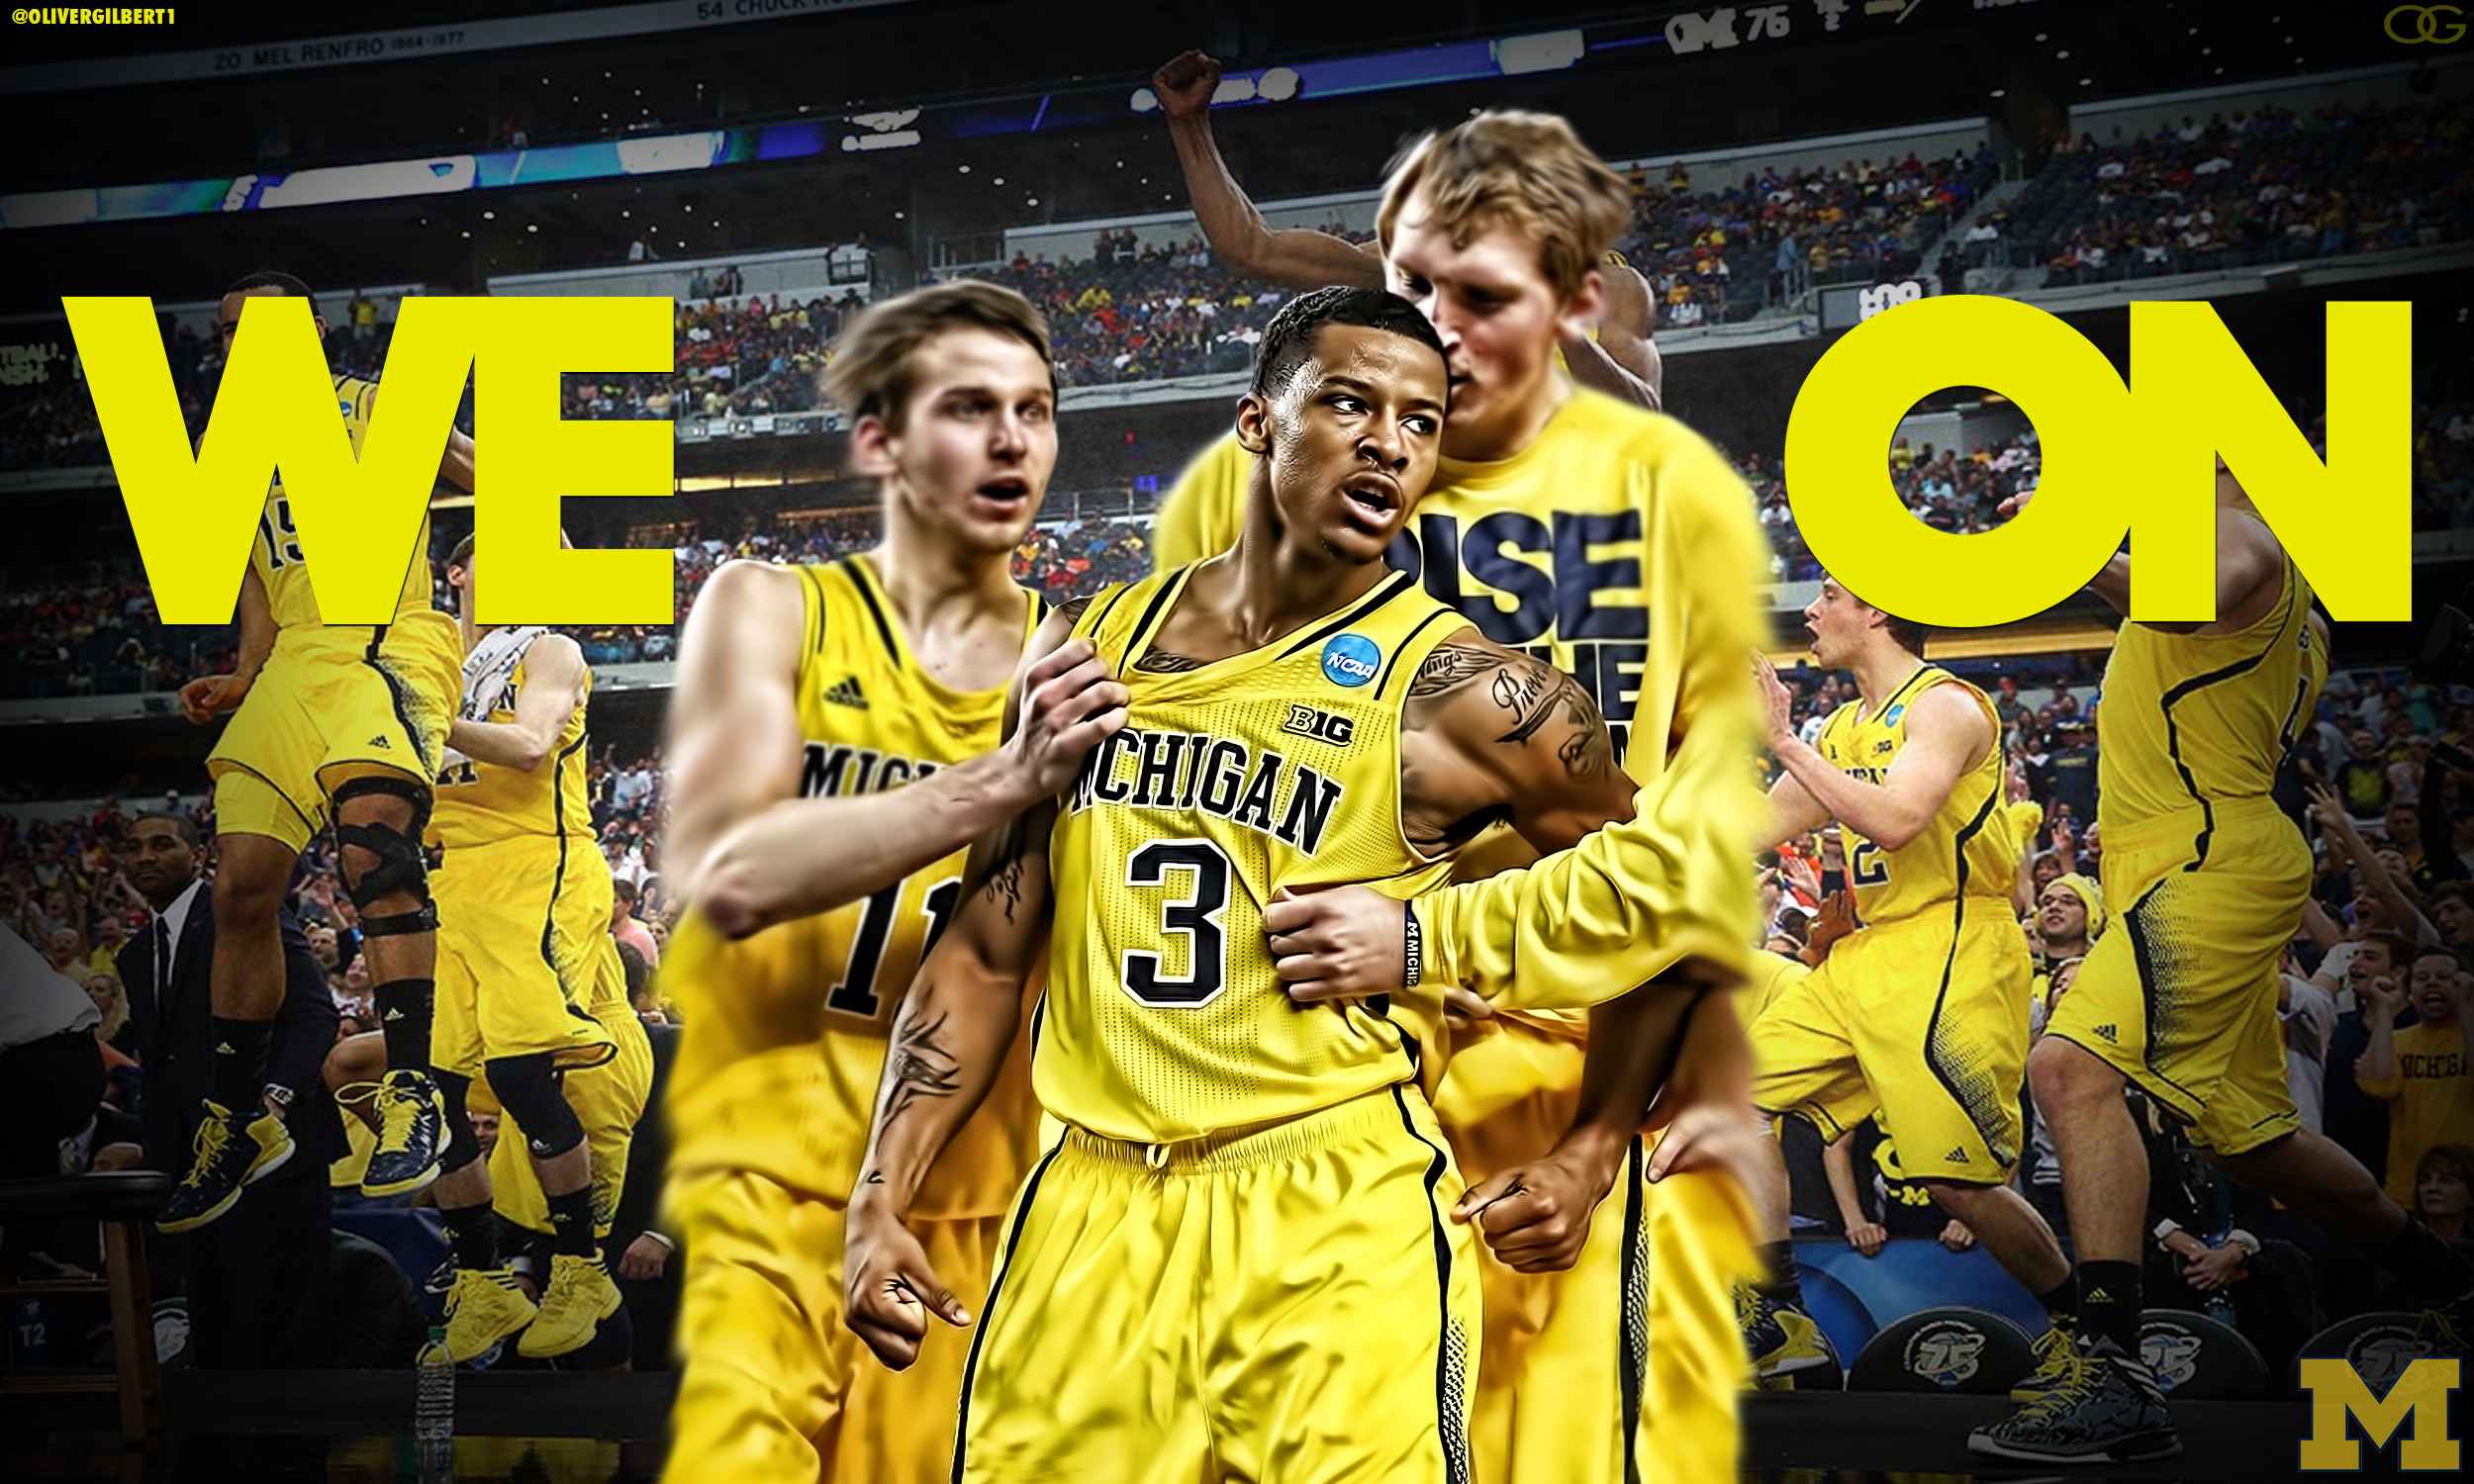 Michigan Basketball Wallpaper Images Pictures   Becuo